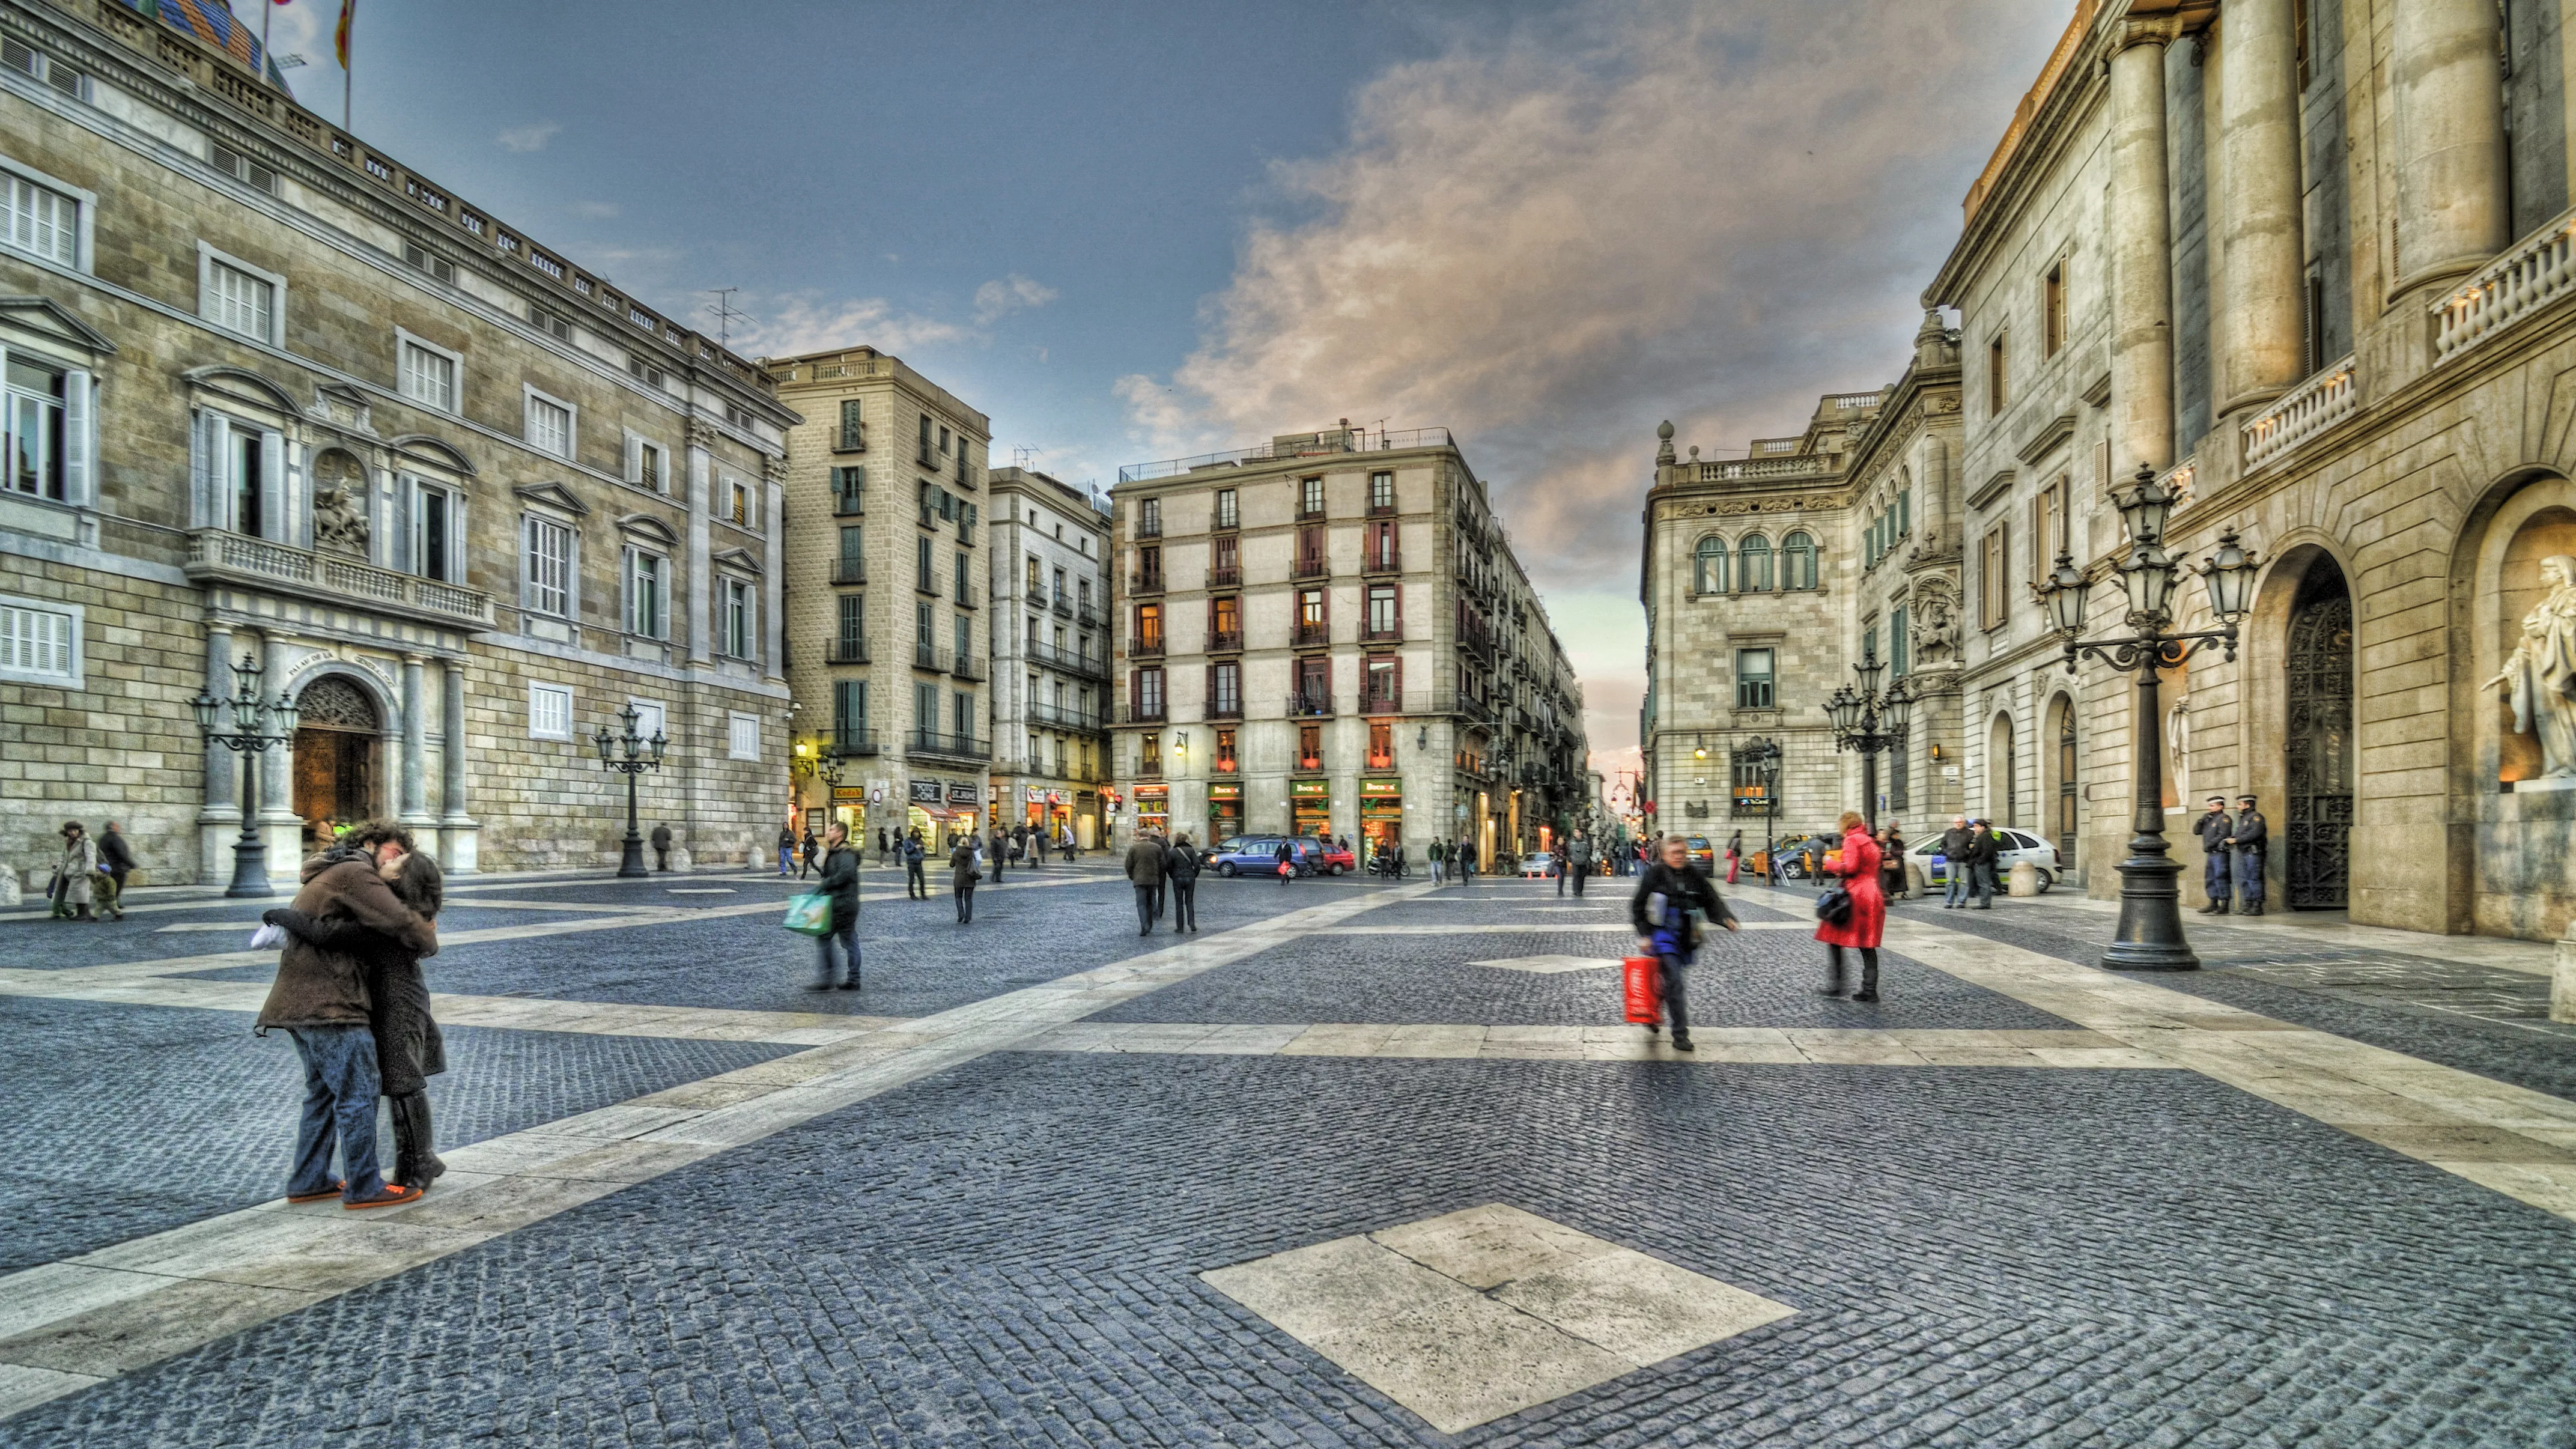 St. James Square in Spain, Europe | Architecture - Rated 3.8